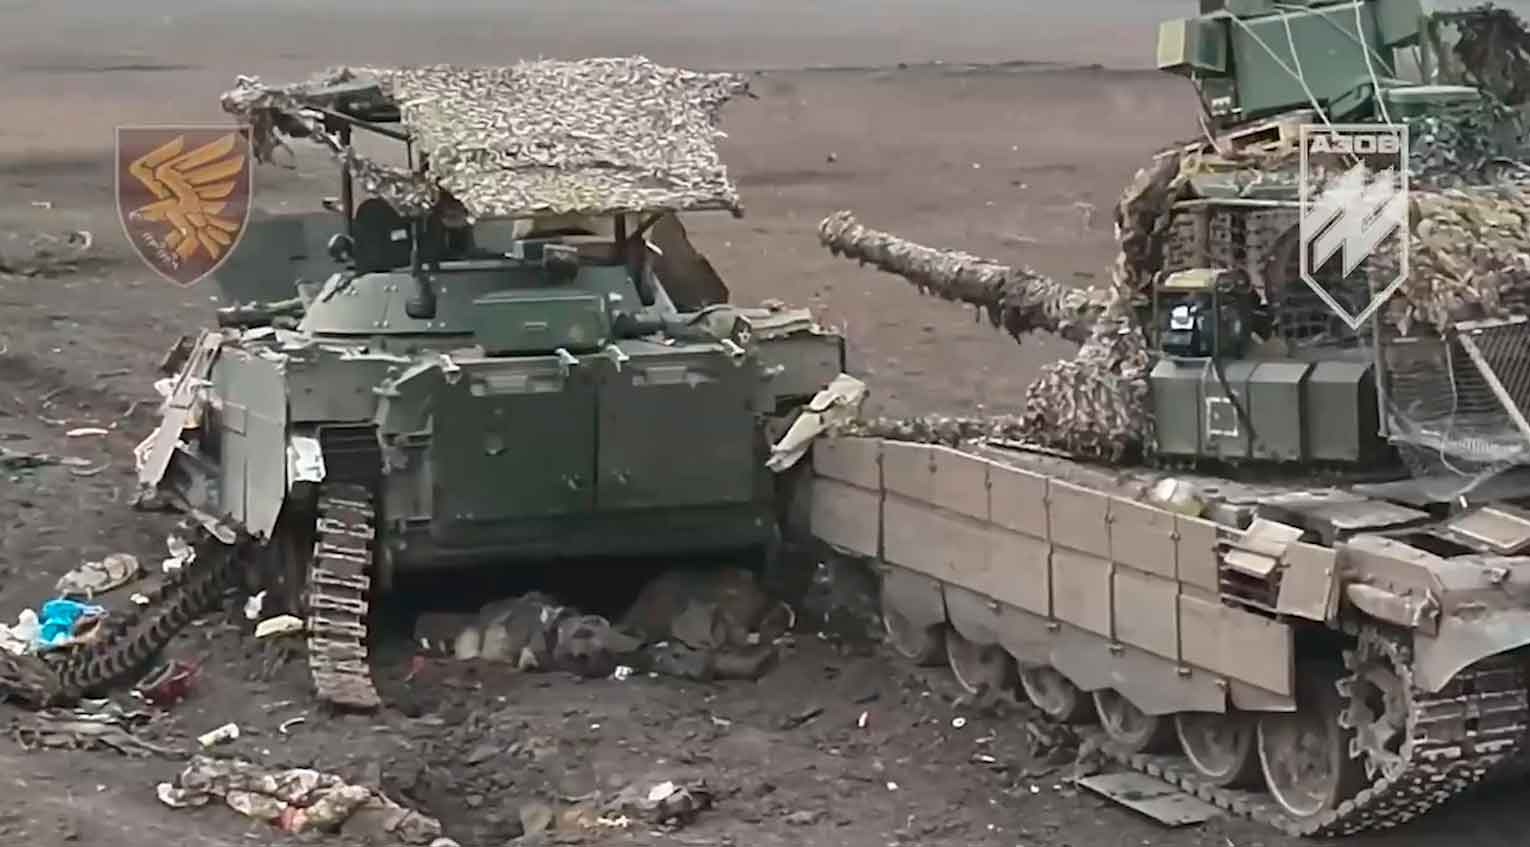 Video shows a column of Russian armored vehicles being destroyed in Donetsk. photos and video: Twitter @EuromaidanPress